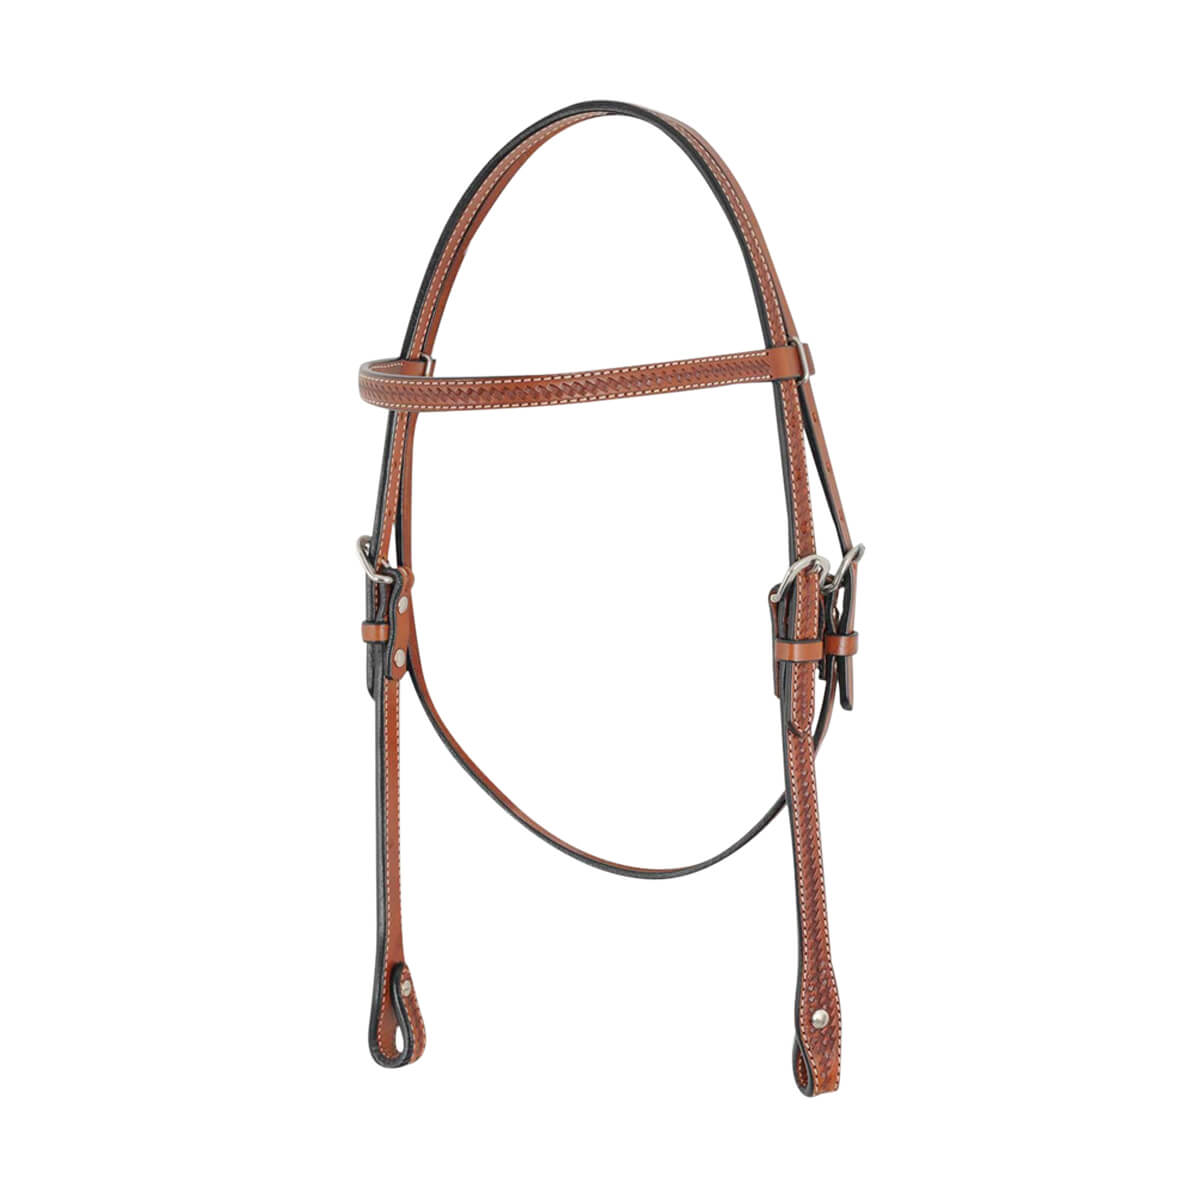 Browband Headstall with Basket Tooling